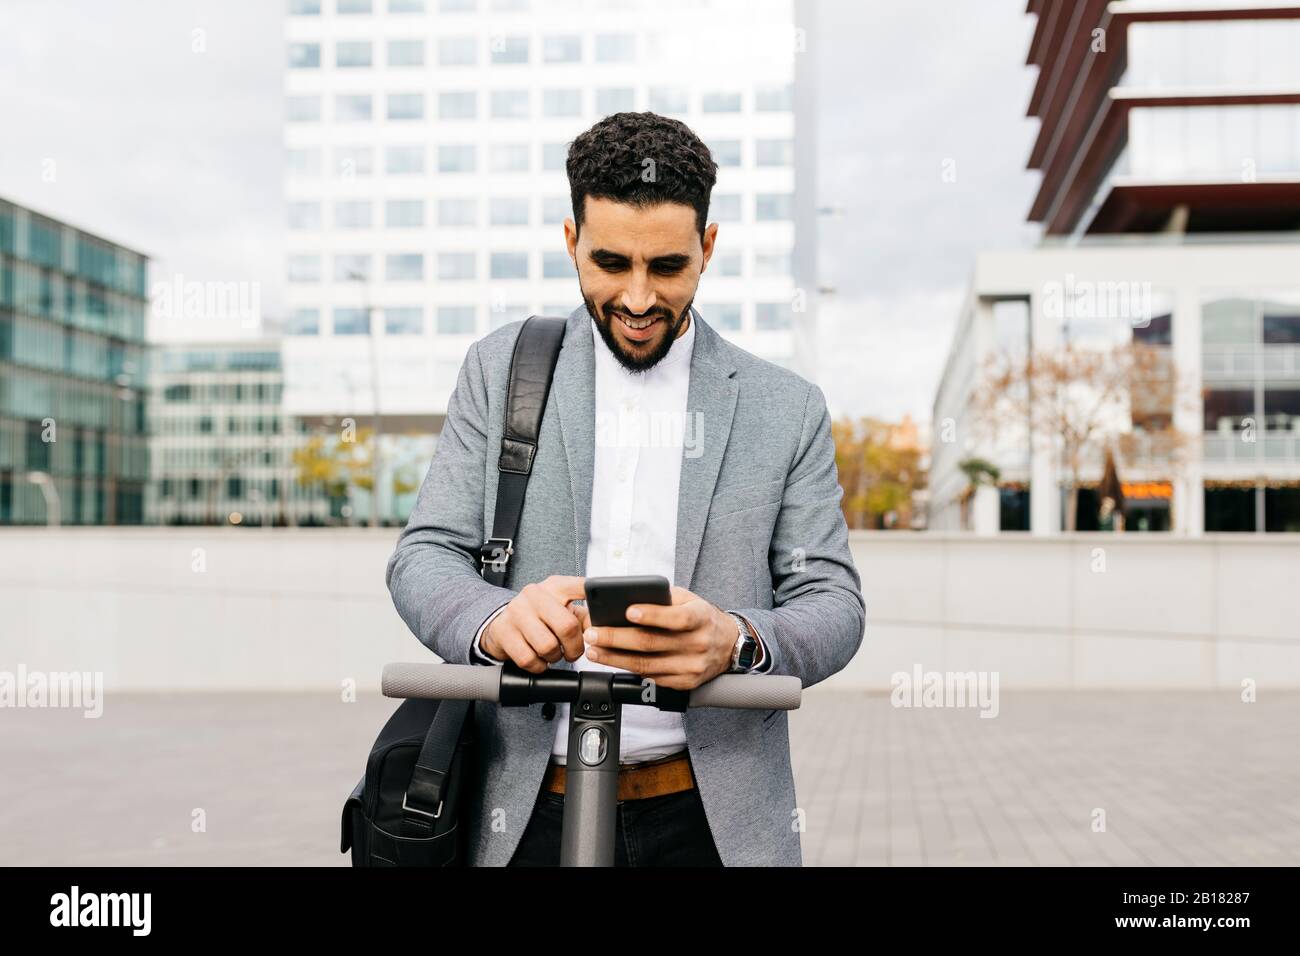 Casual young businessman with electric scooter using cell phone in the city Stock Photo